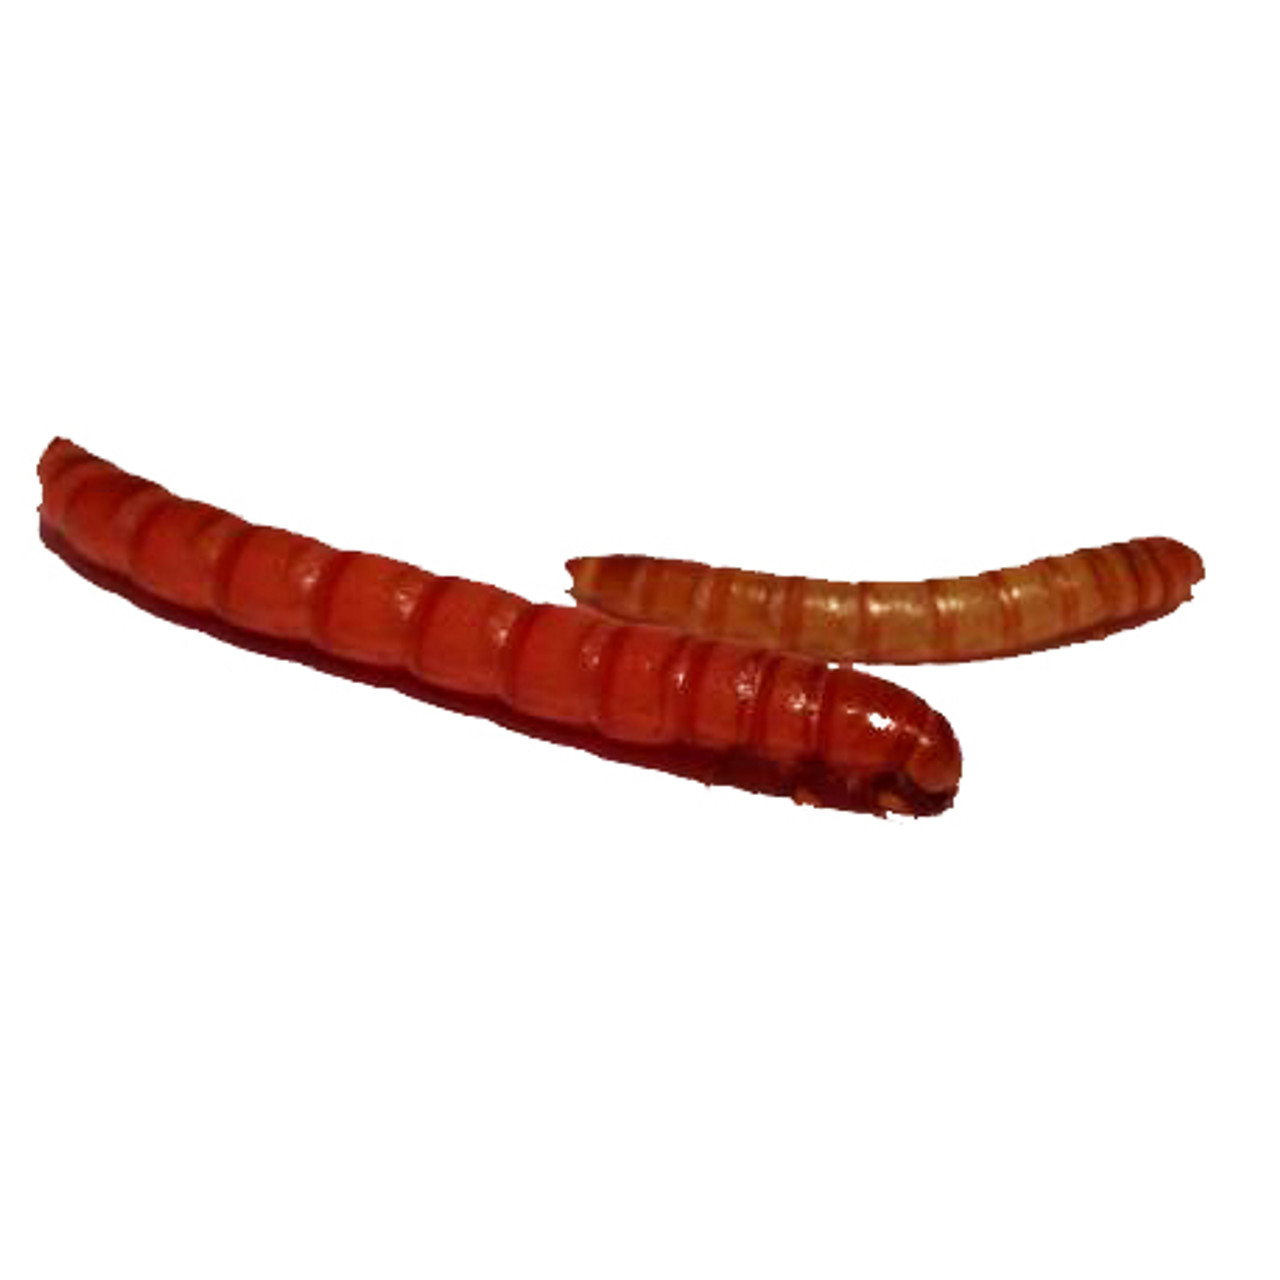 A small mealworm to the right (0.5") and a Red Giant mealworm to the left for size comparison